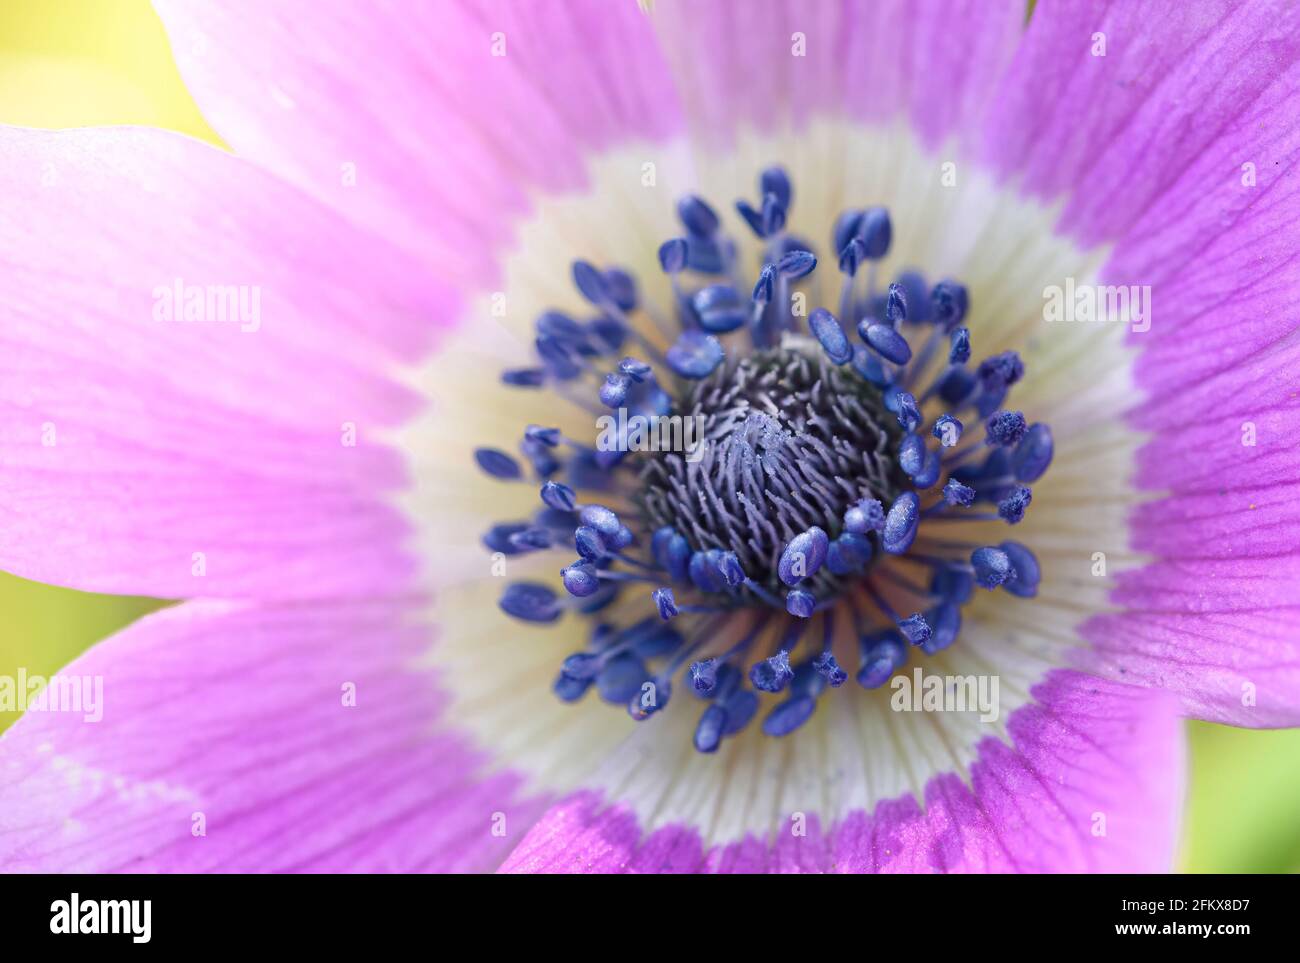 Pink flower. Close up photo with shallow depth of field. Macro photography. Stock Photo